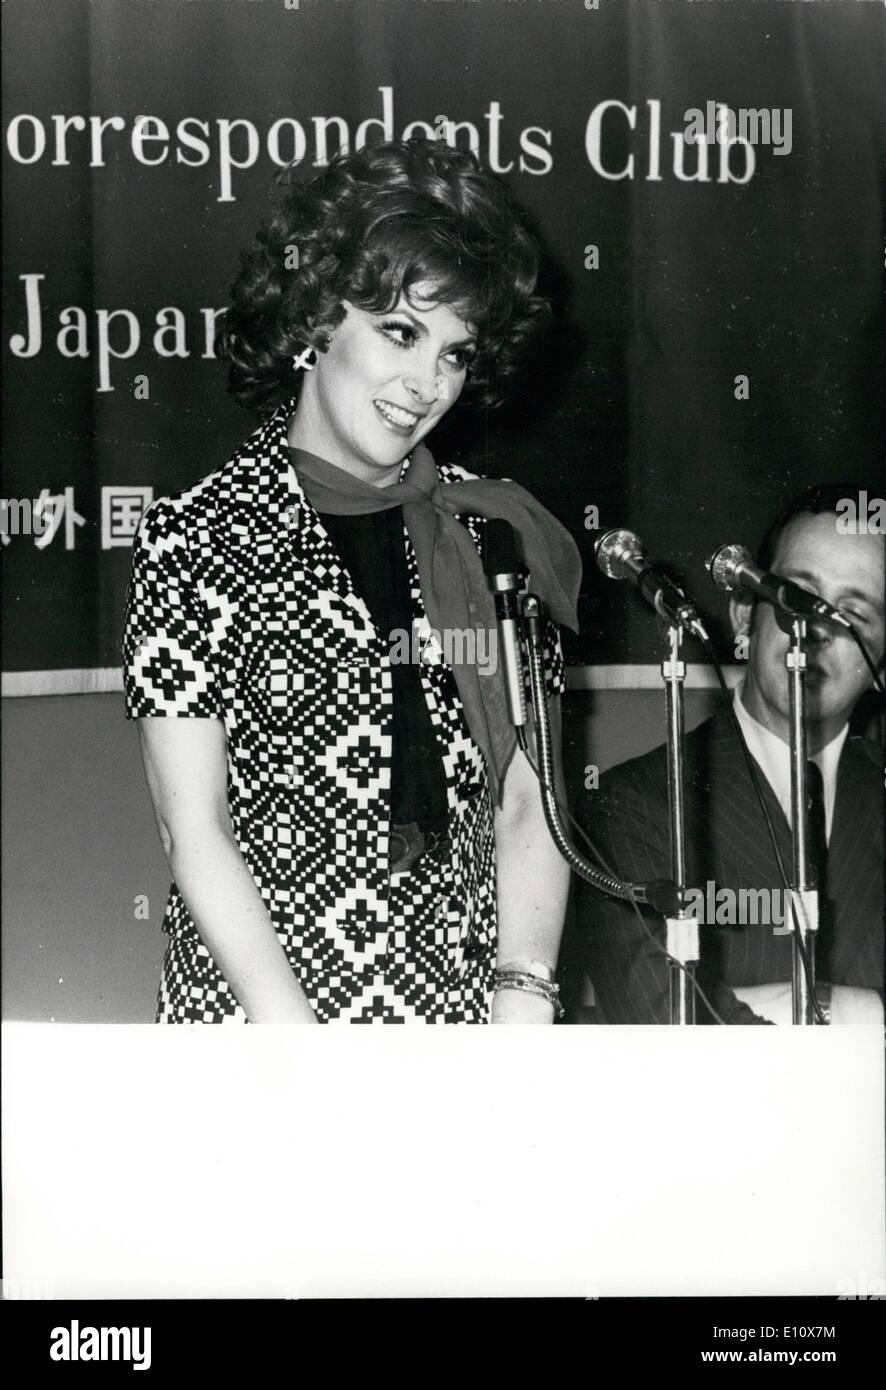 May 05, 1974 - LOLLOBRIGIDA IN TOKYO WITH HER ''ITALIA MIA'' BOOK. Italian movies star Gina Lollobrigida who is currently in Japan to publicize her book of photographs ''Italia Mia'', spoke at the Foreign Correspondents Club of Japan in Tokyo before an audience of 322 journalists and their guests. In her speech she said she ''tried to capture the poetry of life and the spirit of Italy and the Italian people''. Comparing the Italian ubiquitous paparazzi with Japanese photographers she said the Japanese were even worse than the Italia paparazzi...everyone has a camera in Japan she said Stock Photo